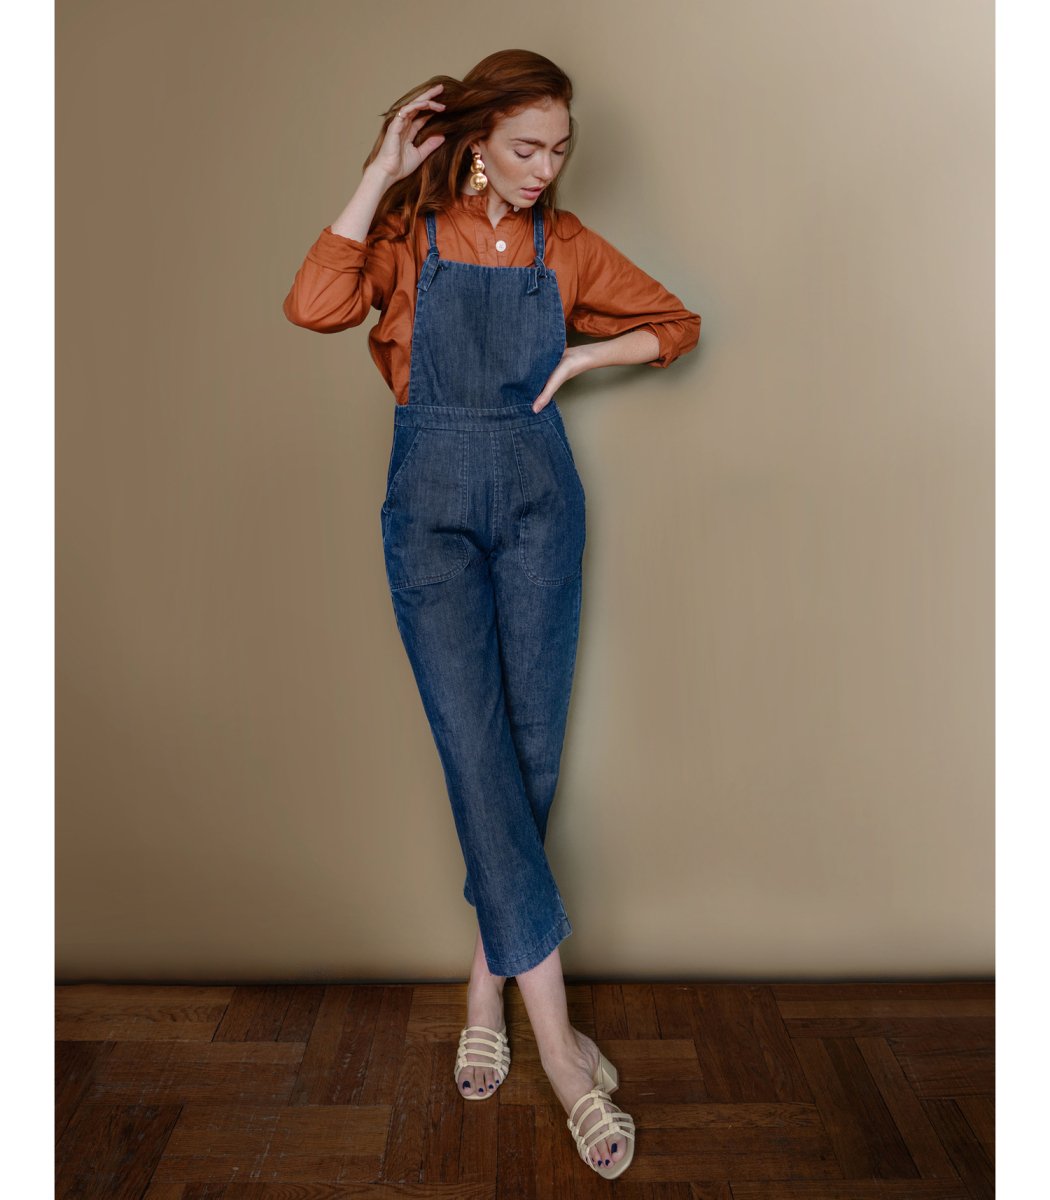 Model wears dark blue cropped overalls with thin adjustable straps and two front pockets over a long sleeve orange button up shirt. The Knot Overalls in Dark Indigo are designed by Loup and made in New York City, NY.